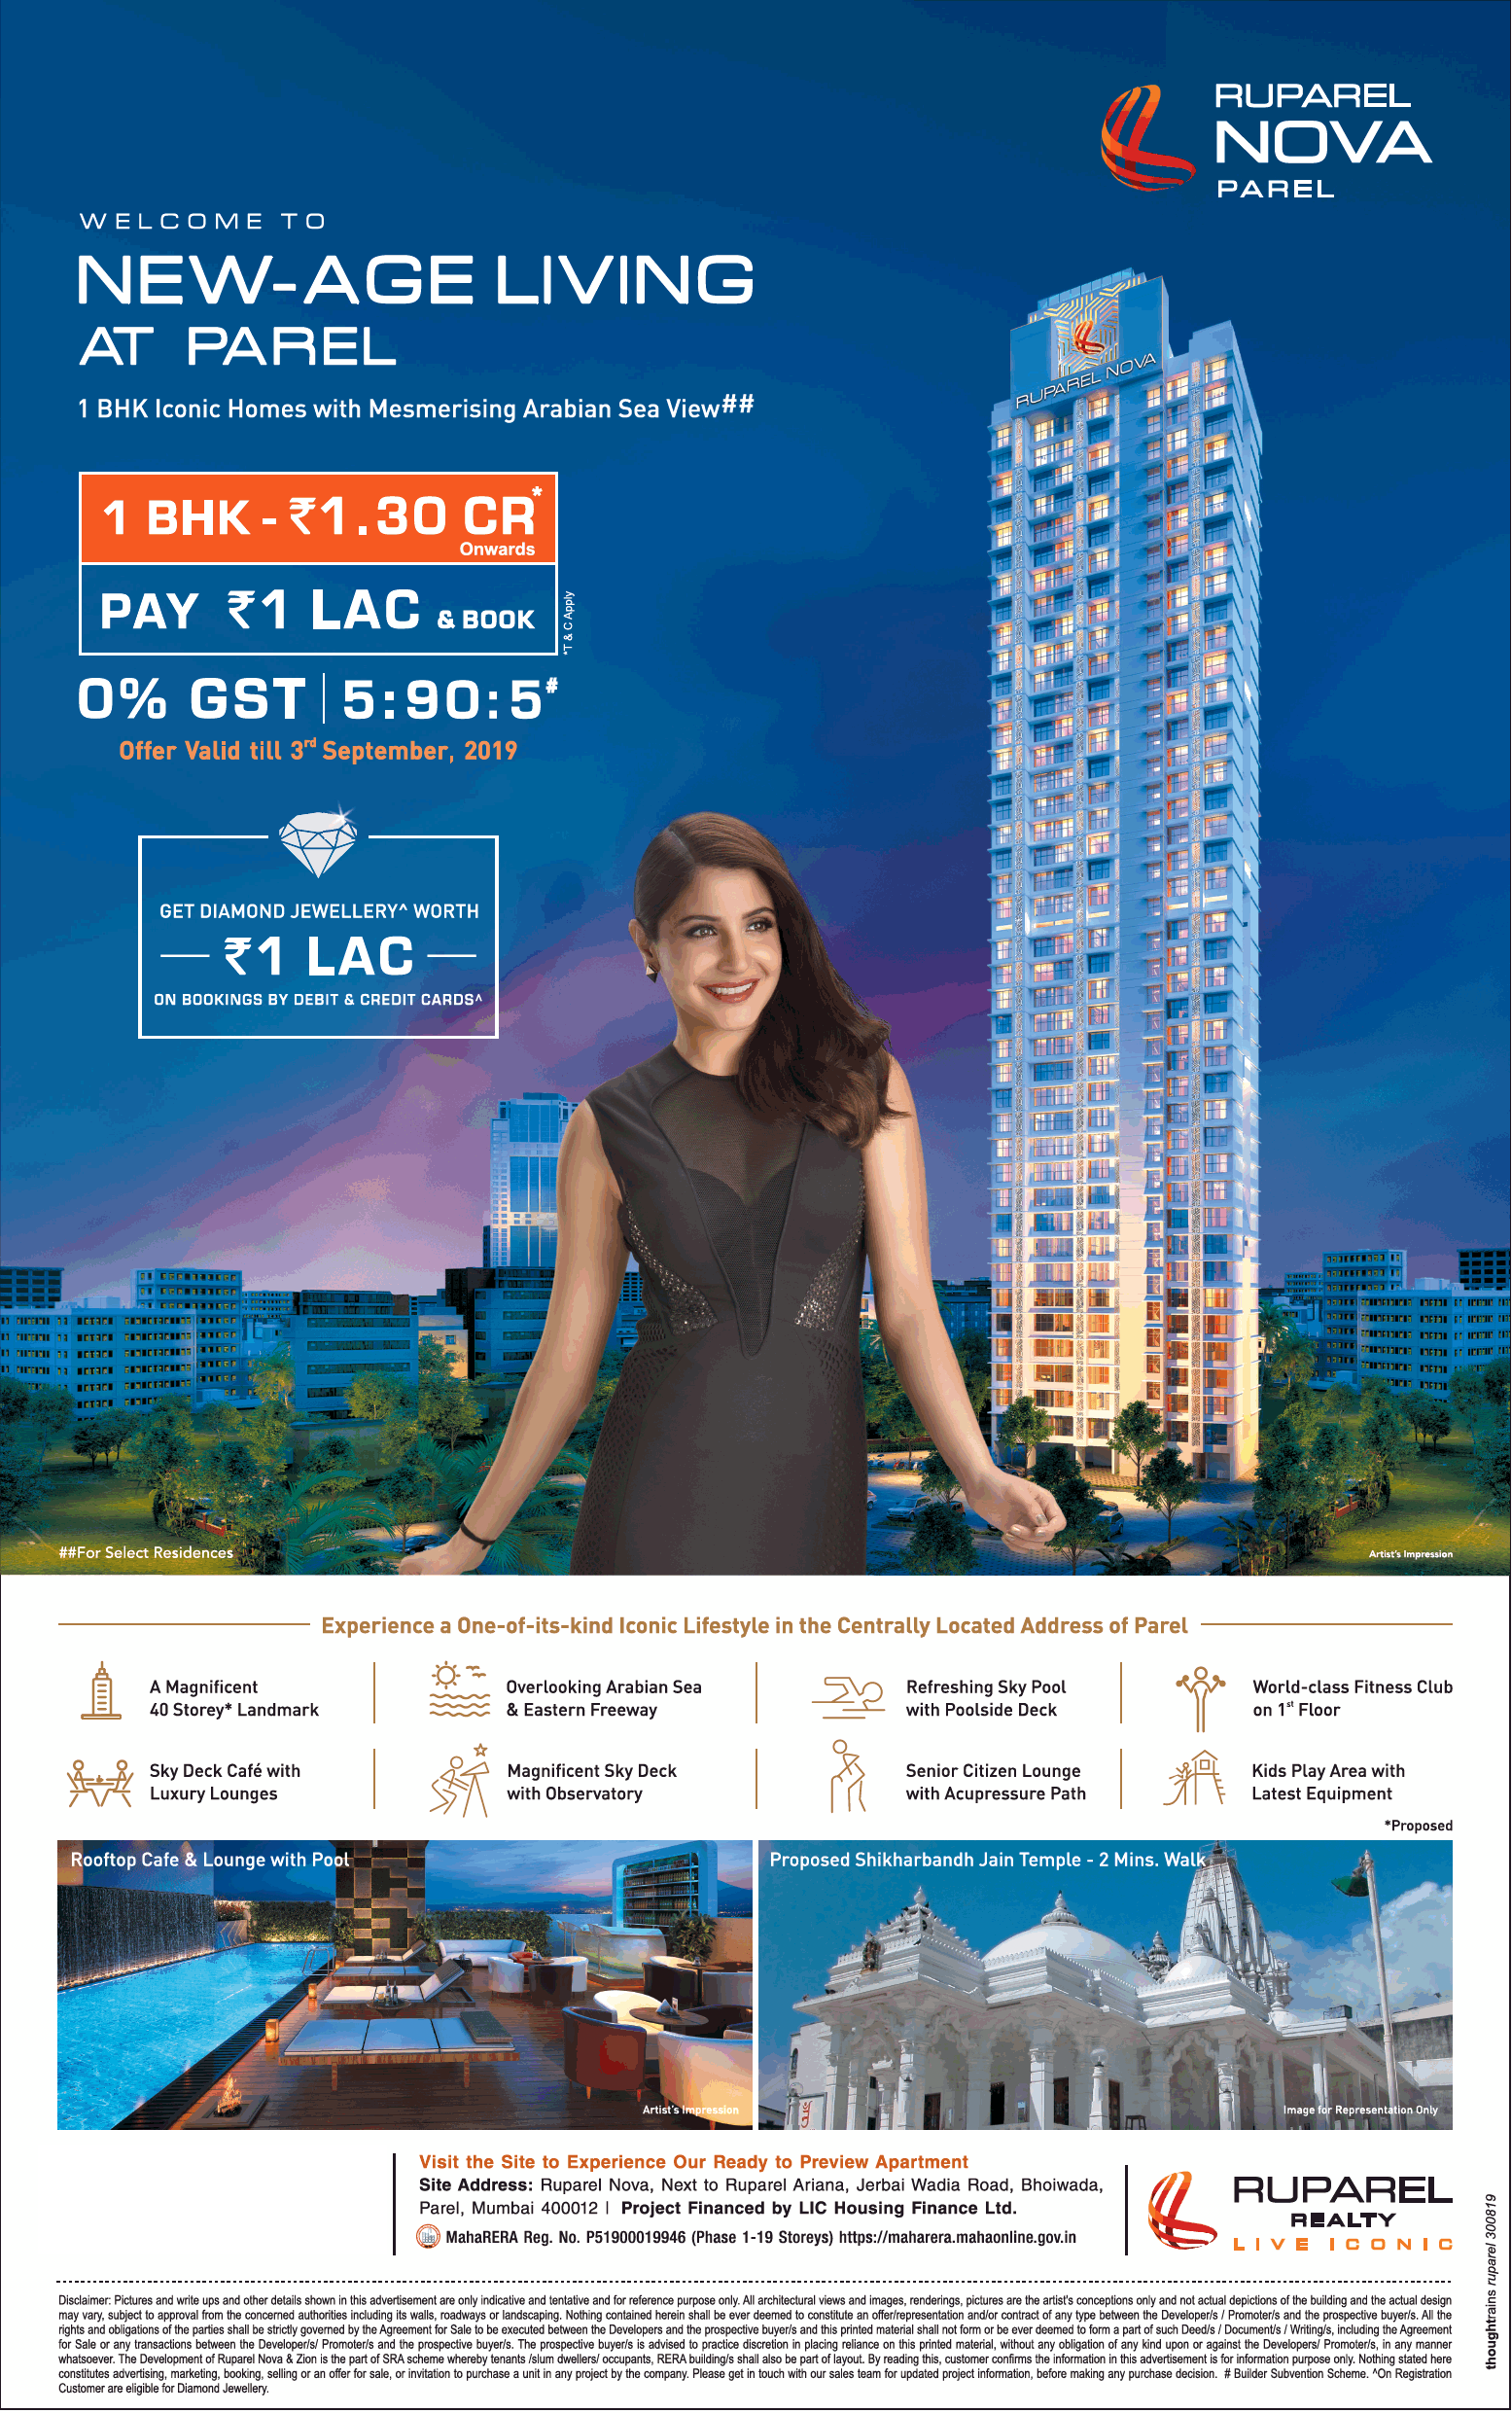 Pay just 1 lakh & book your 1 bhk at Ruperal Nova Parel in South Mumbai Update